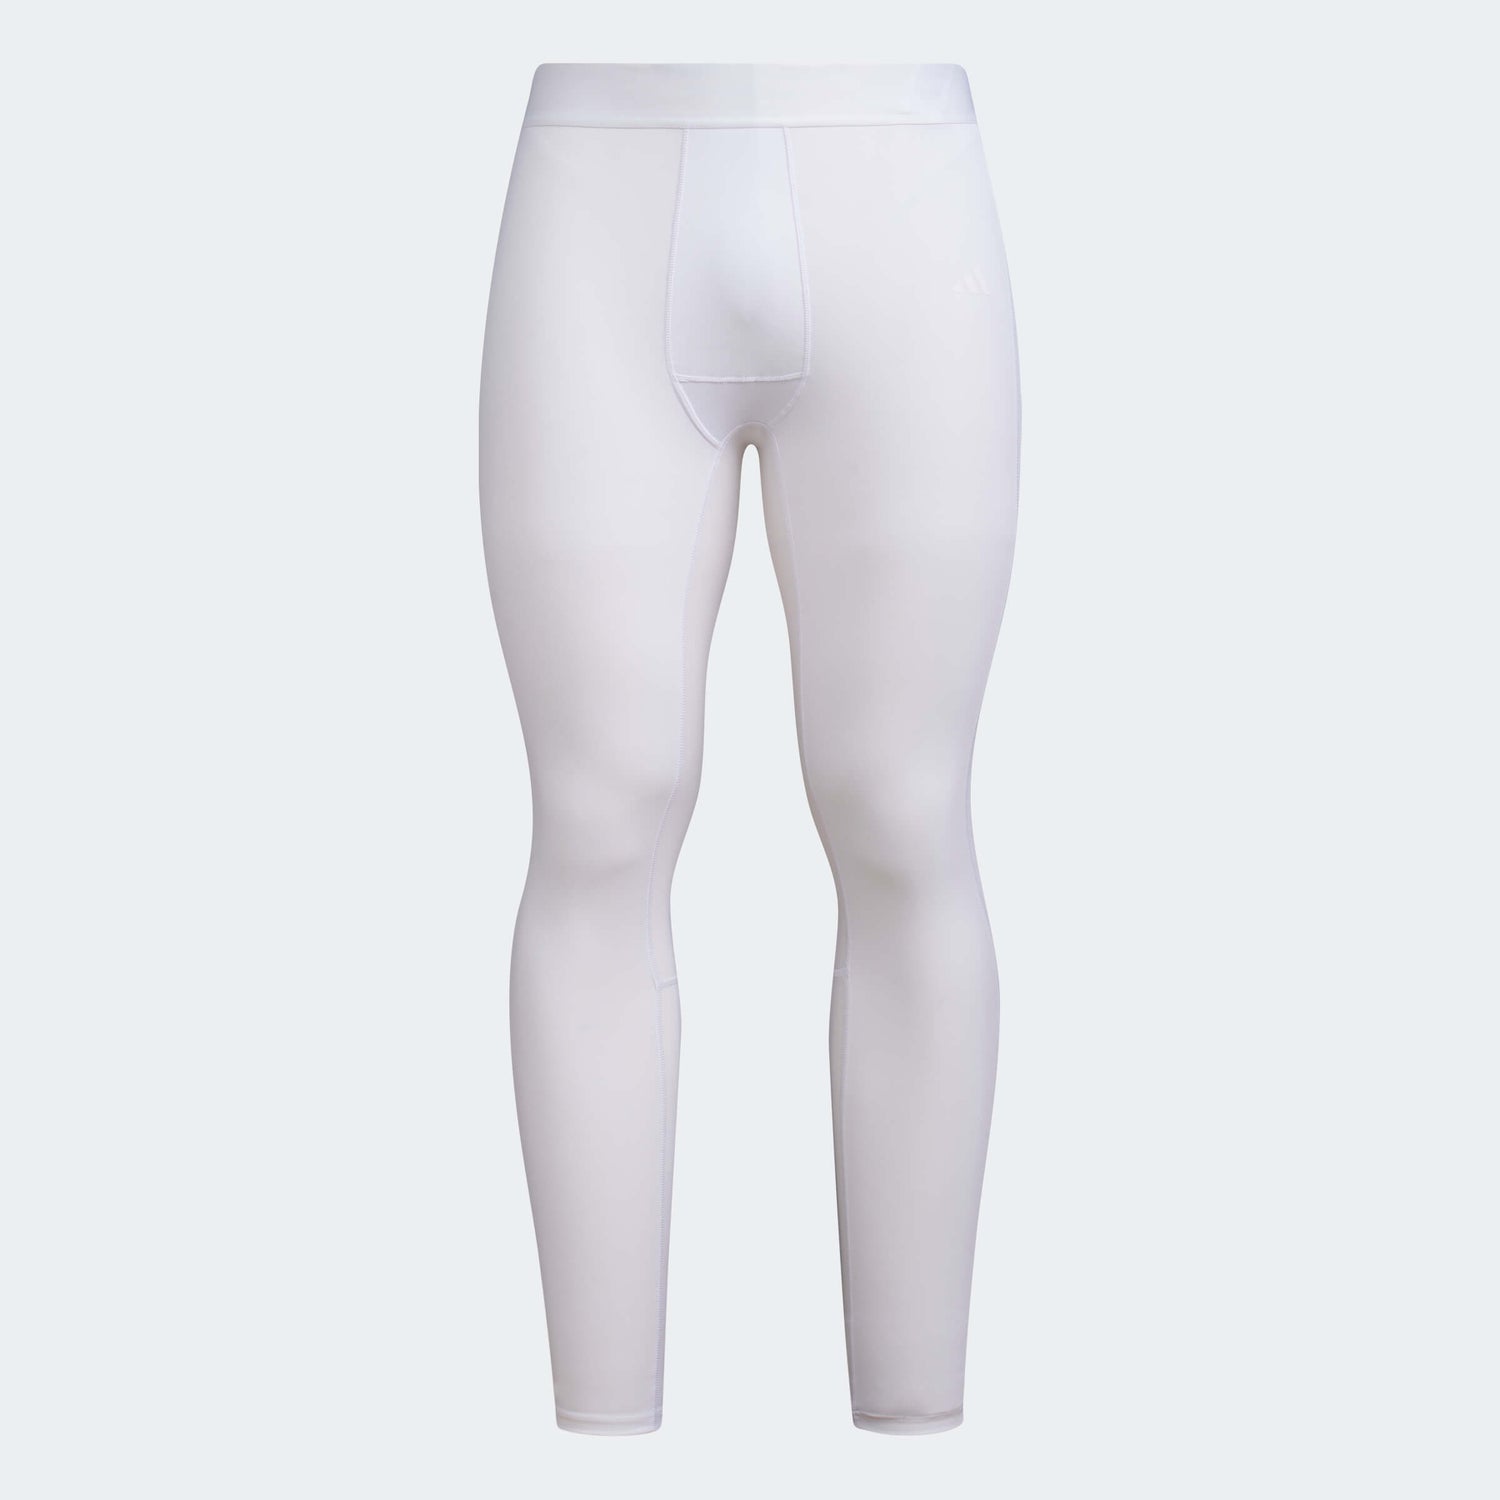 adidas Men's Techfit Long Tights White (Front)